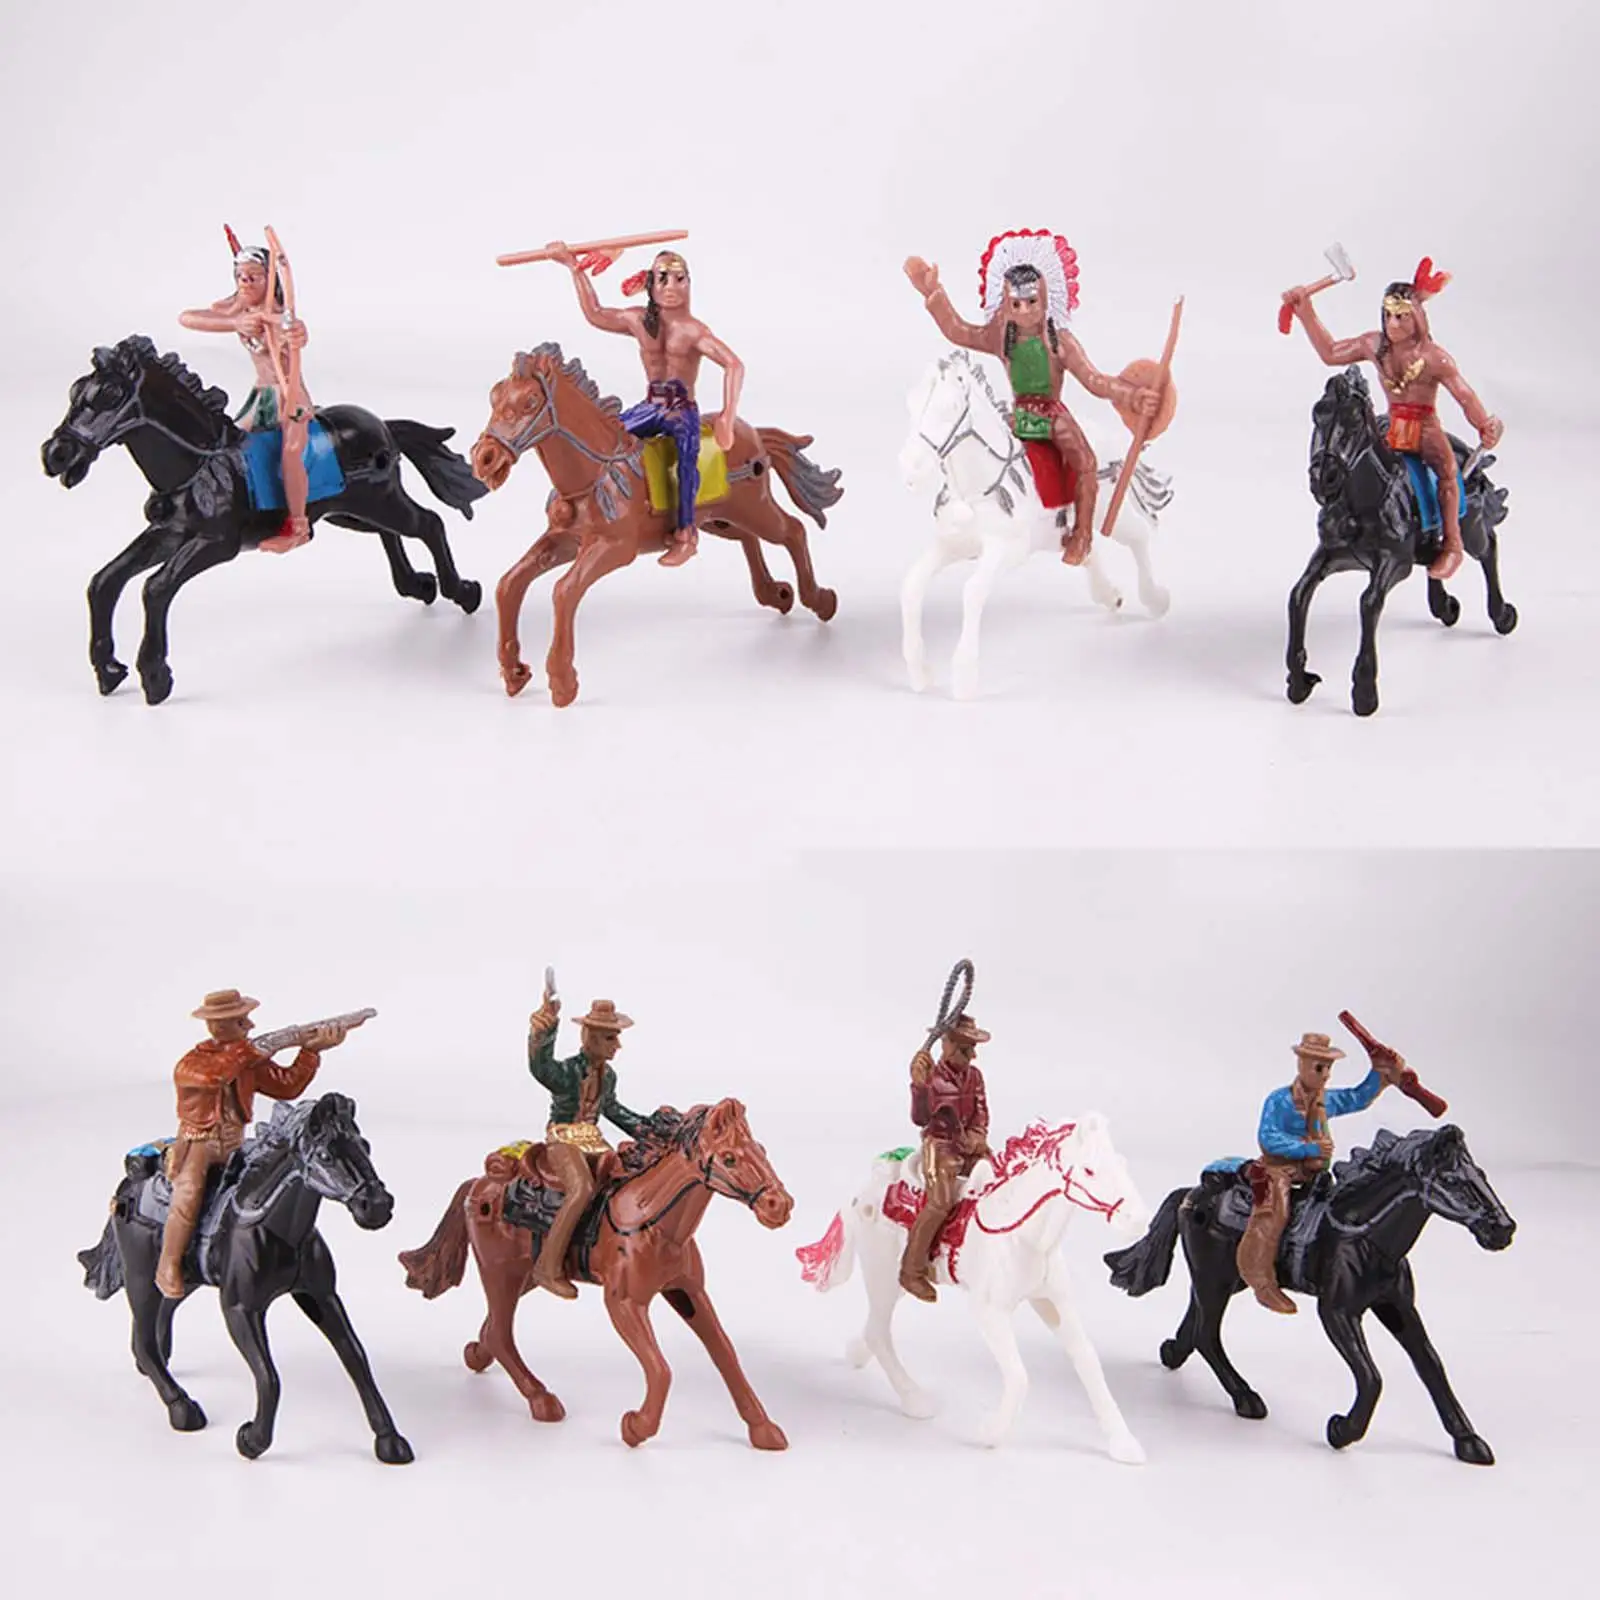 Pack of 8 Indian Model Action Figures for Preschool Boys Home Decoration